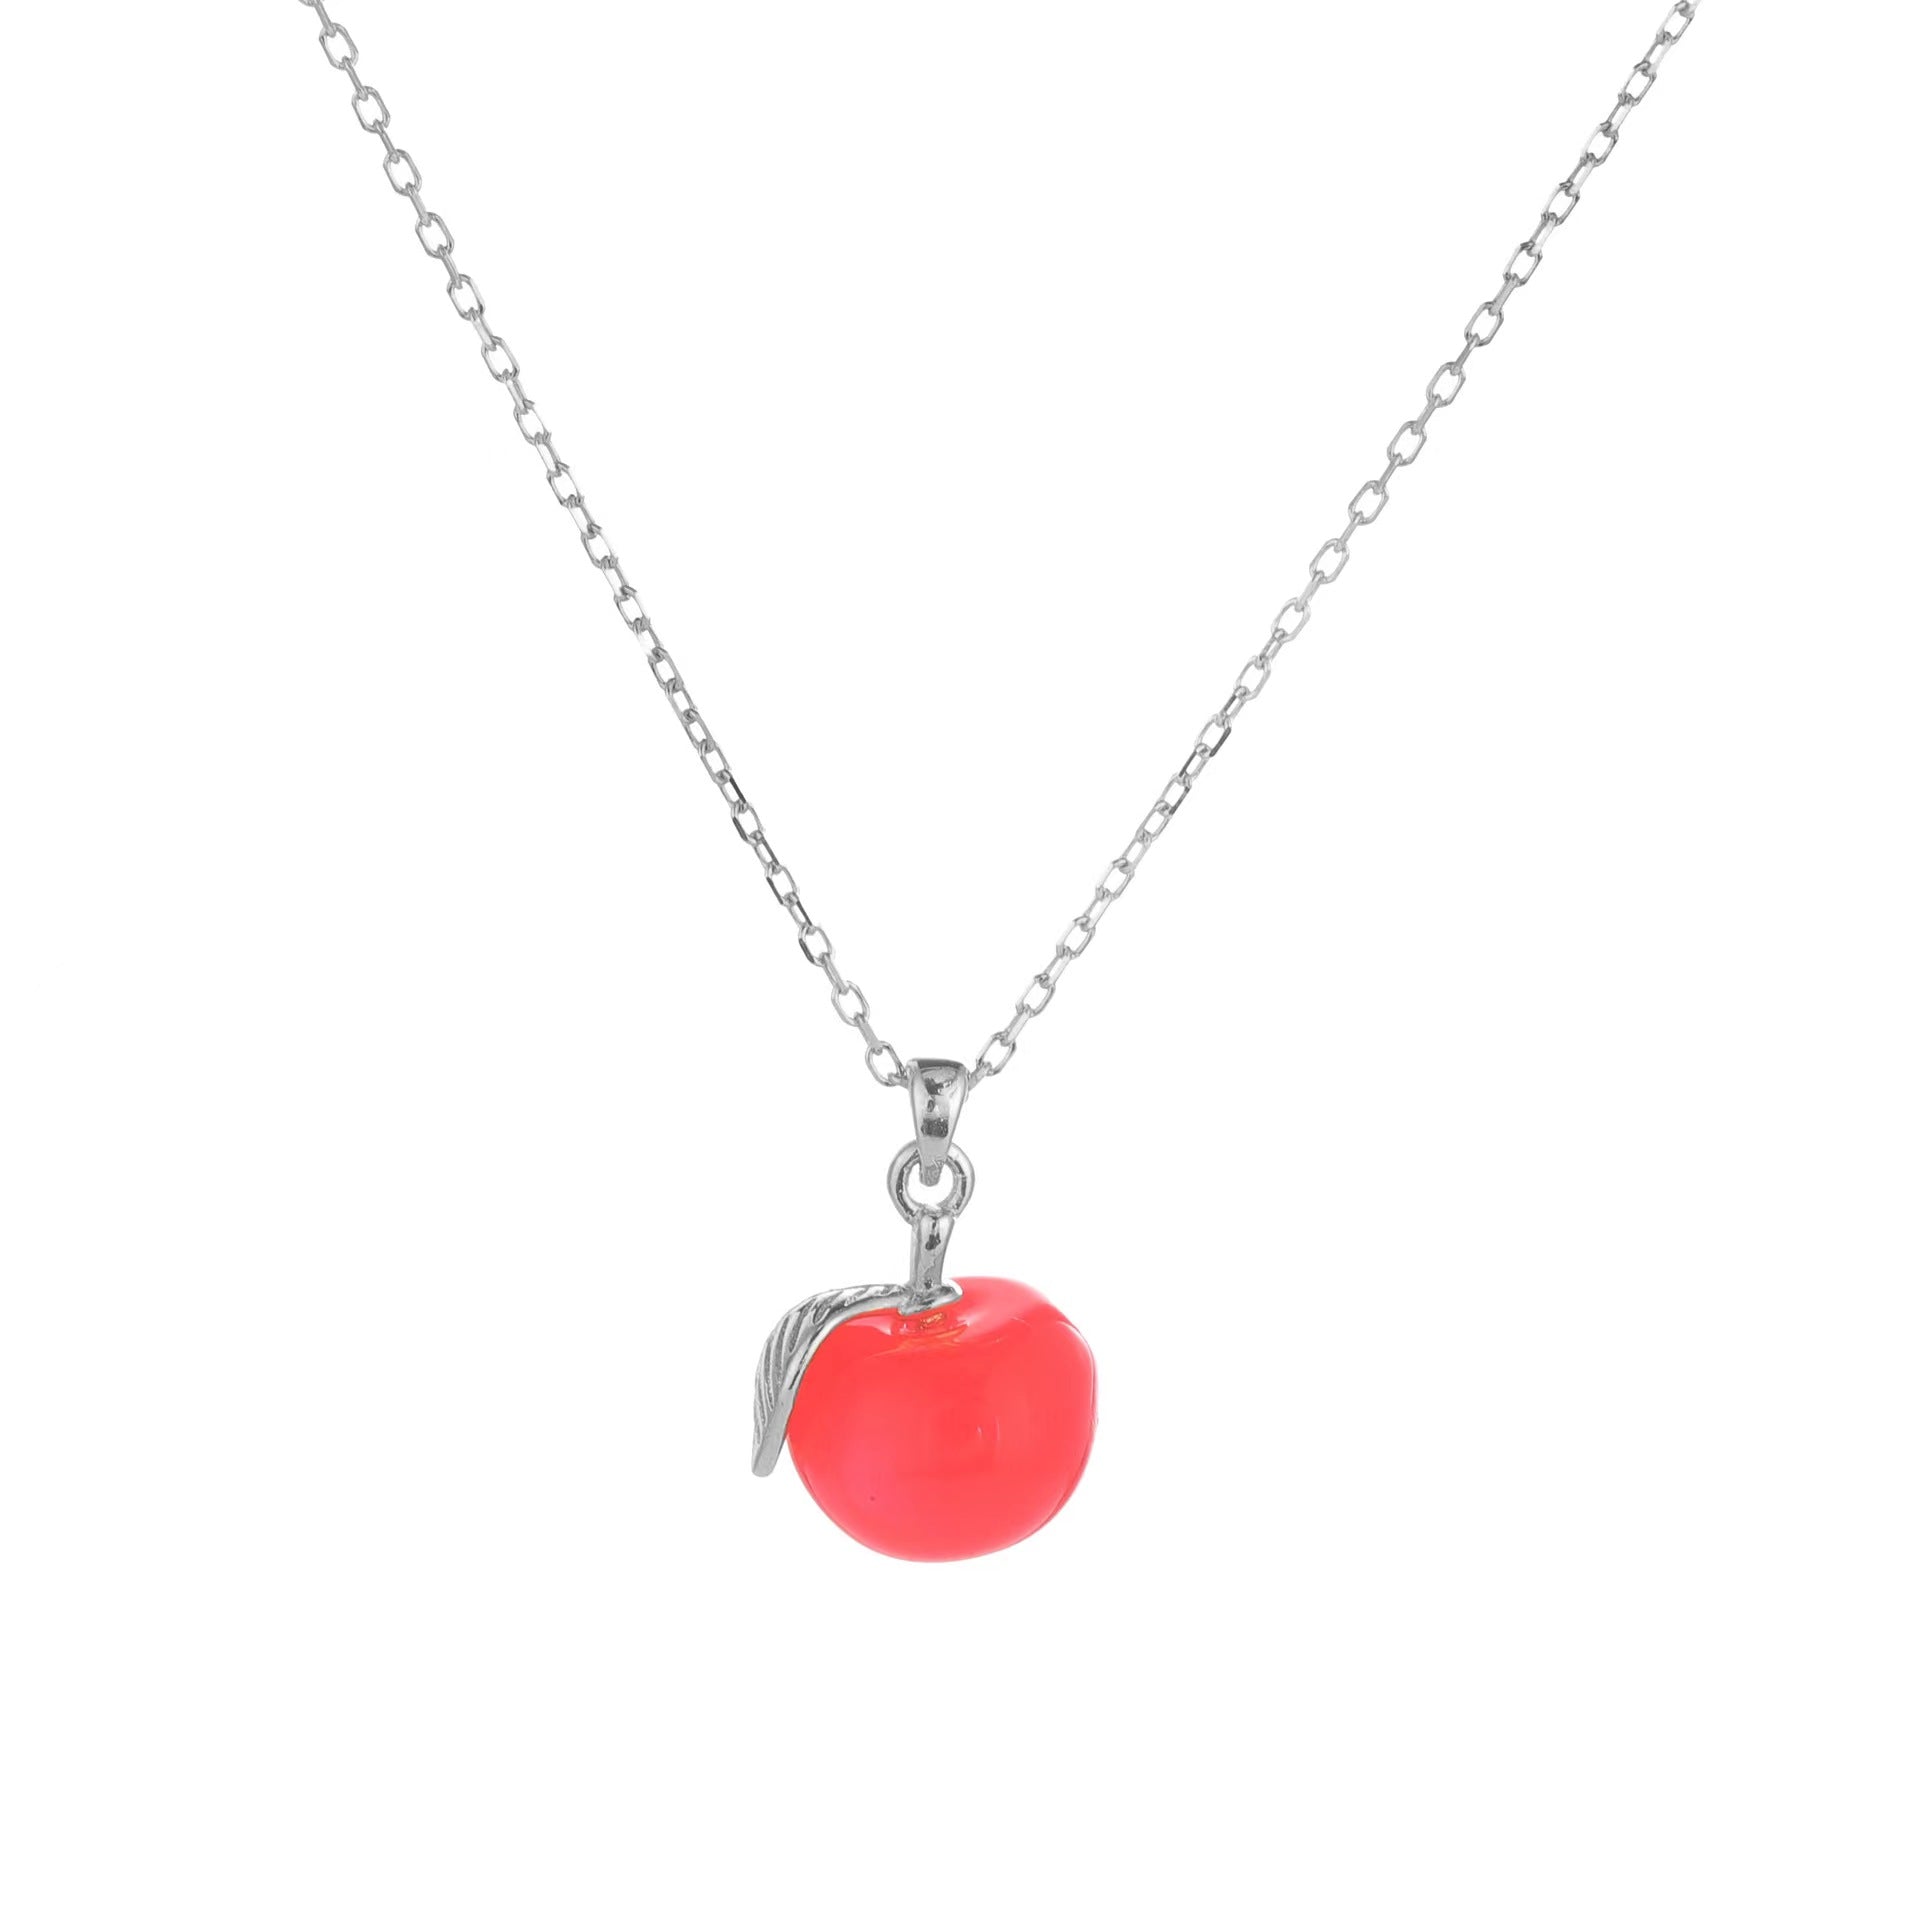 Cute Red Apple Pendant Necklace for Women Girls 925 Sterling Silver Charms